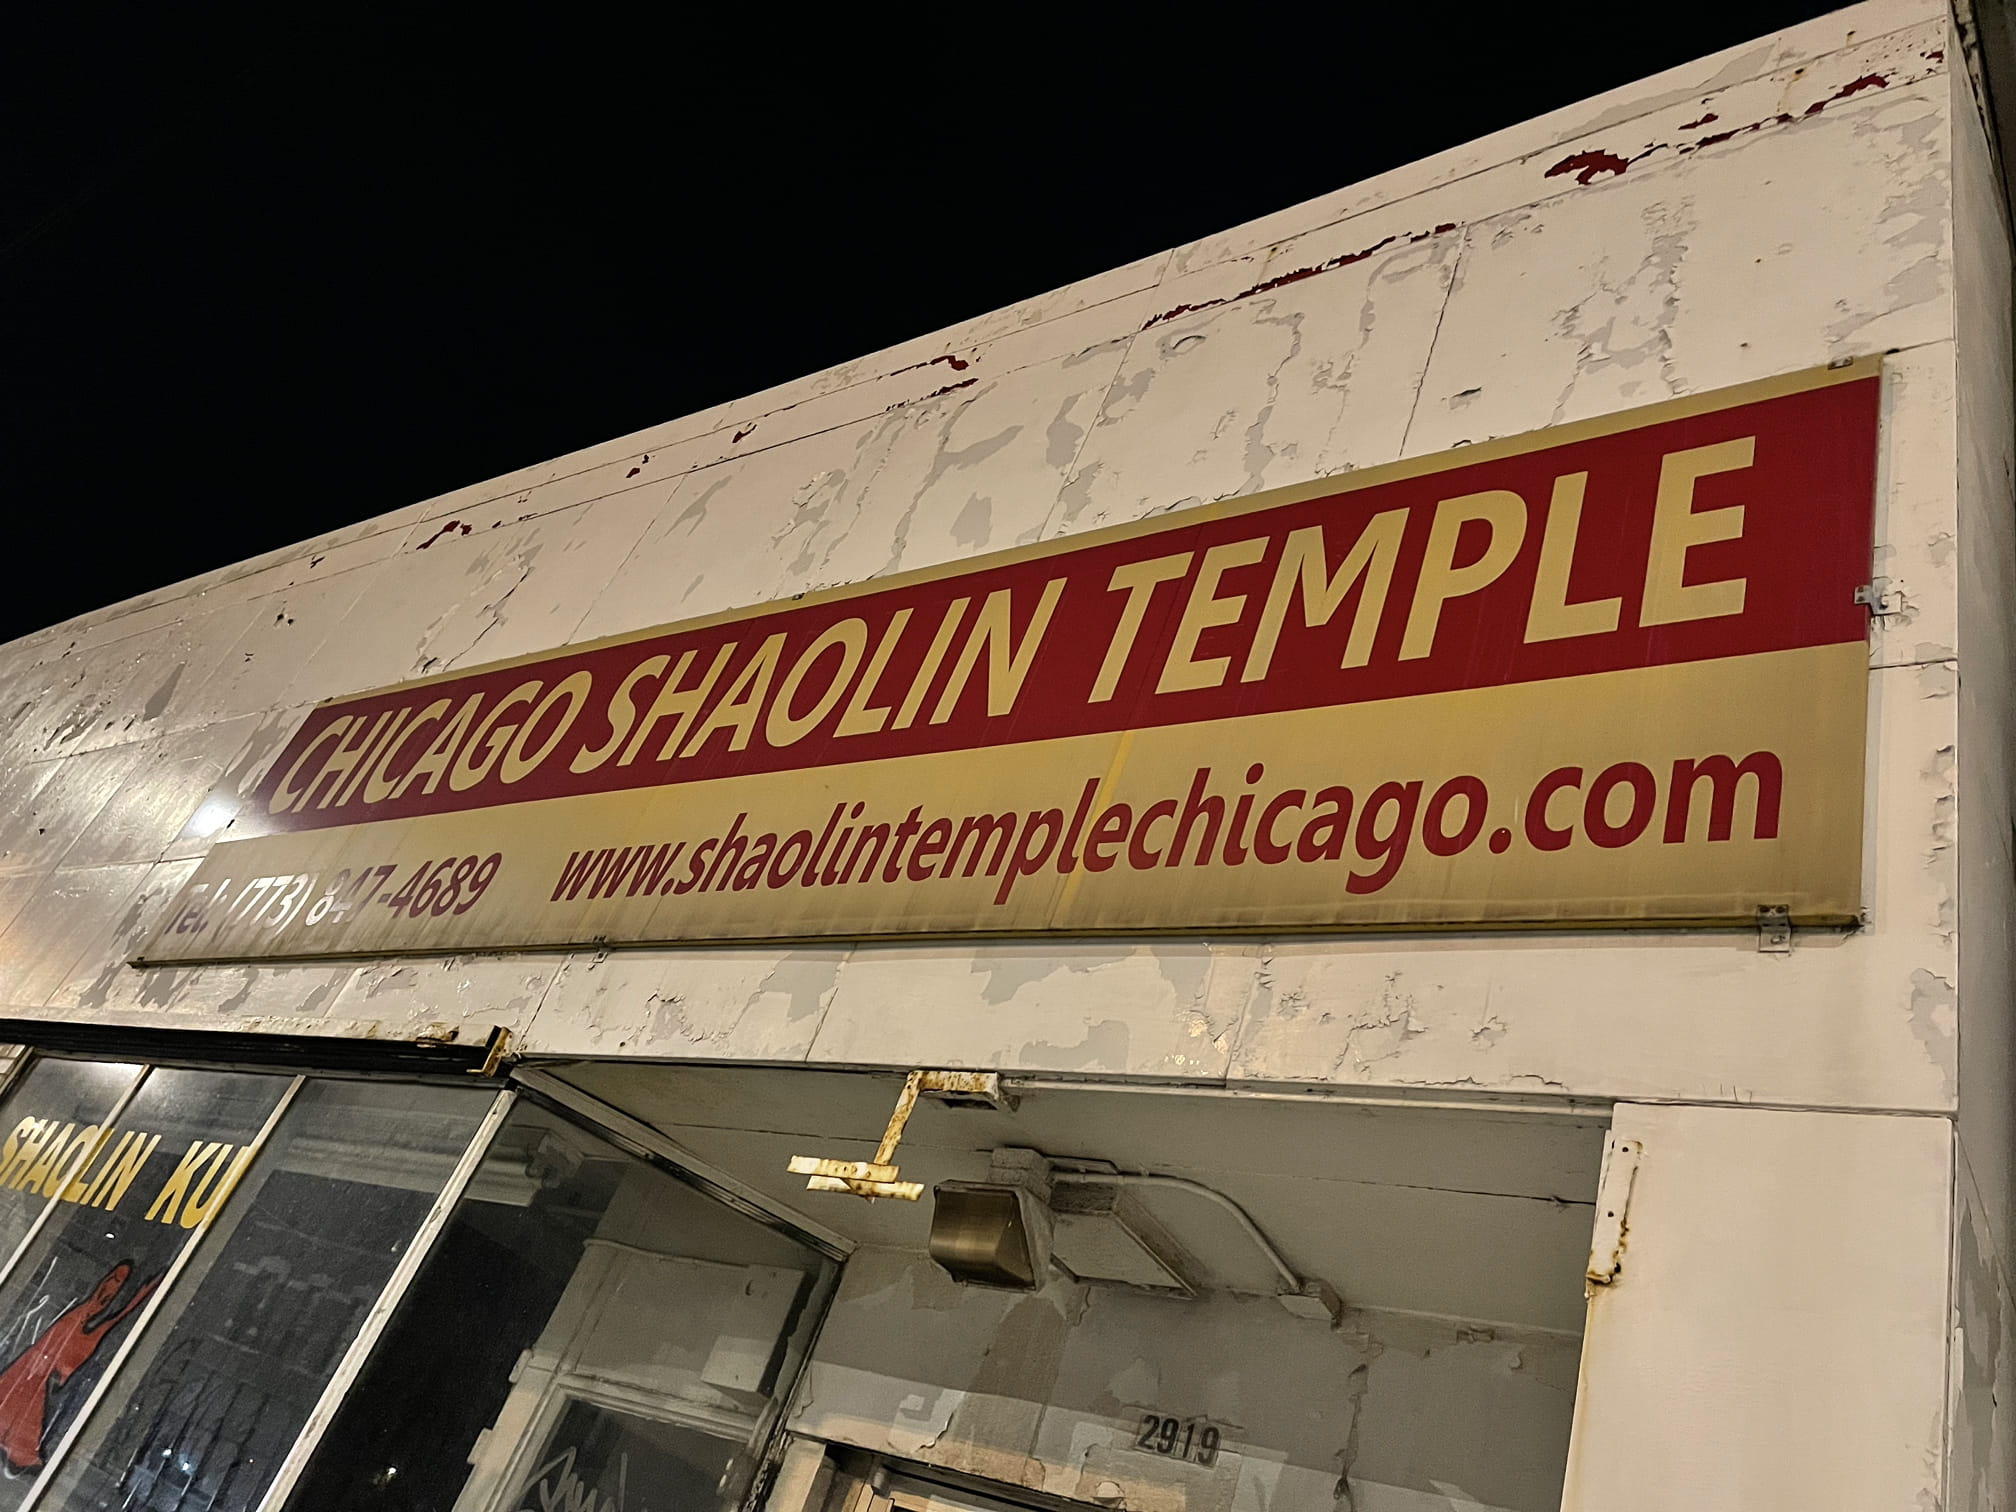 Chicago shaolin temple